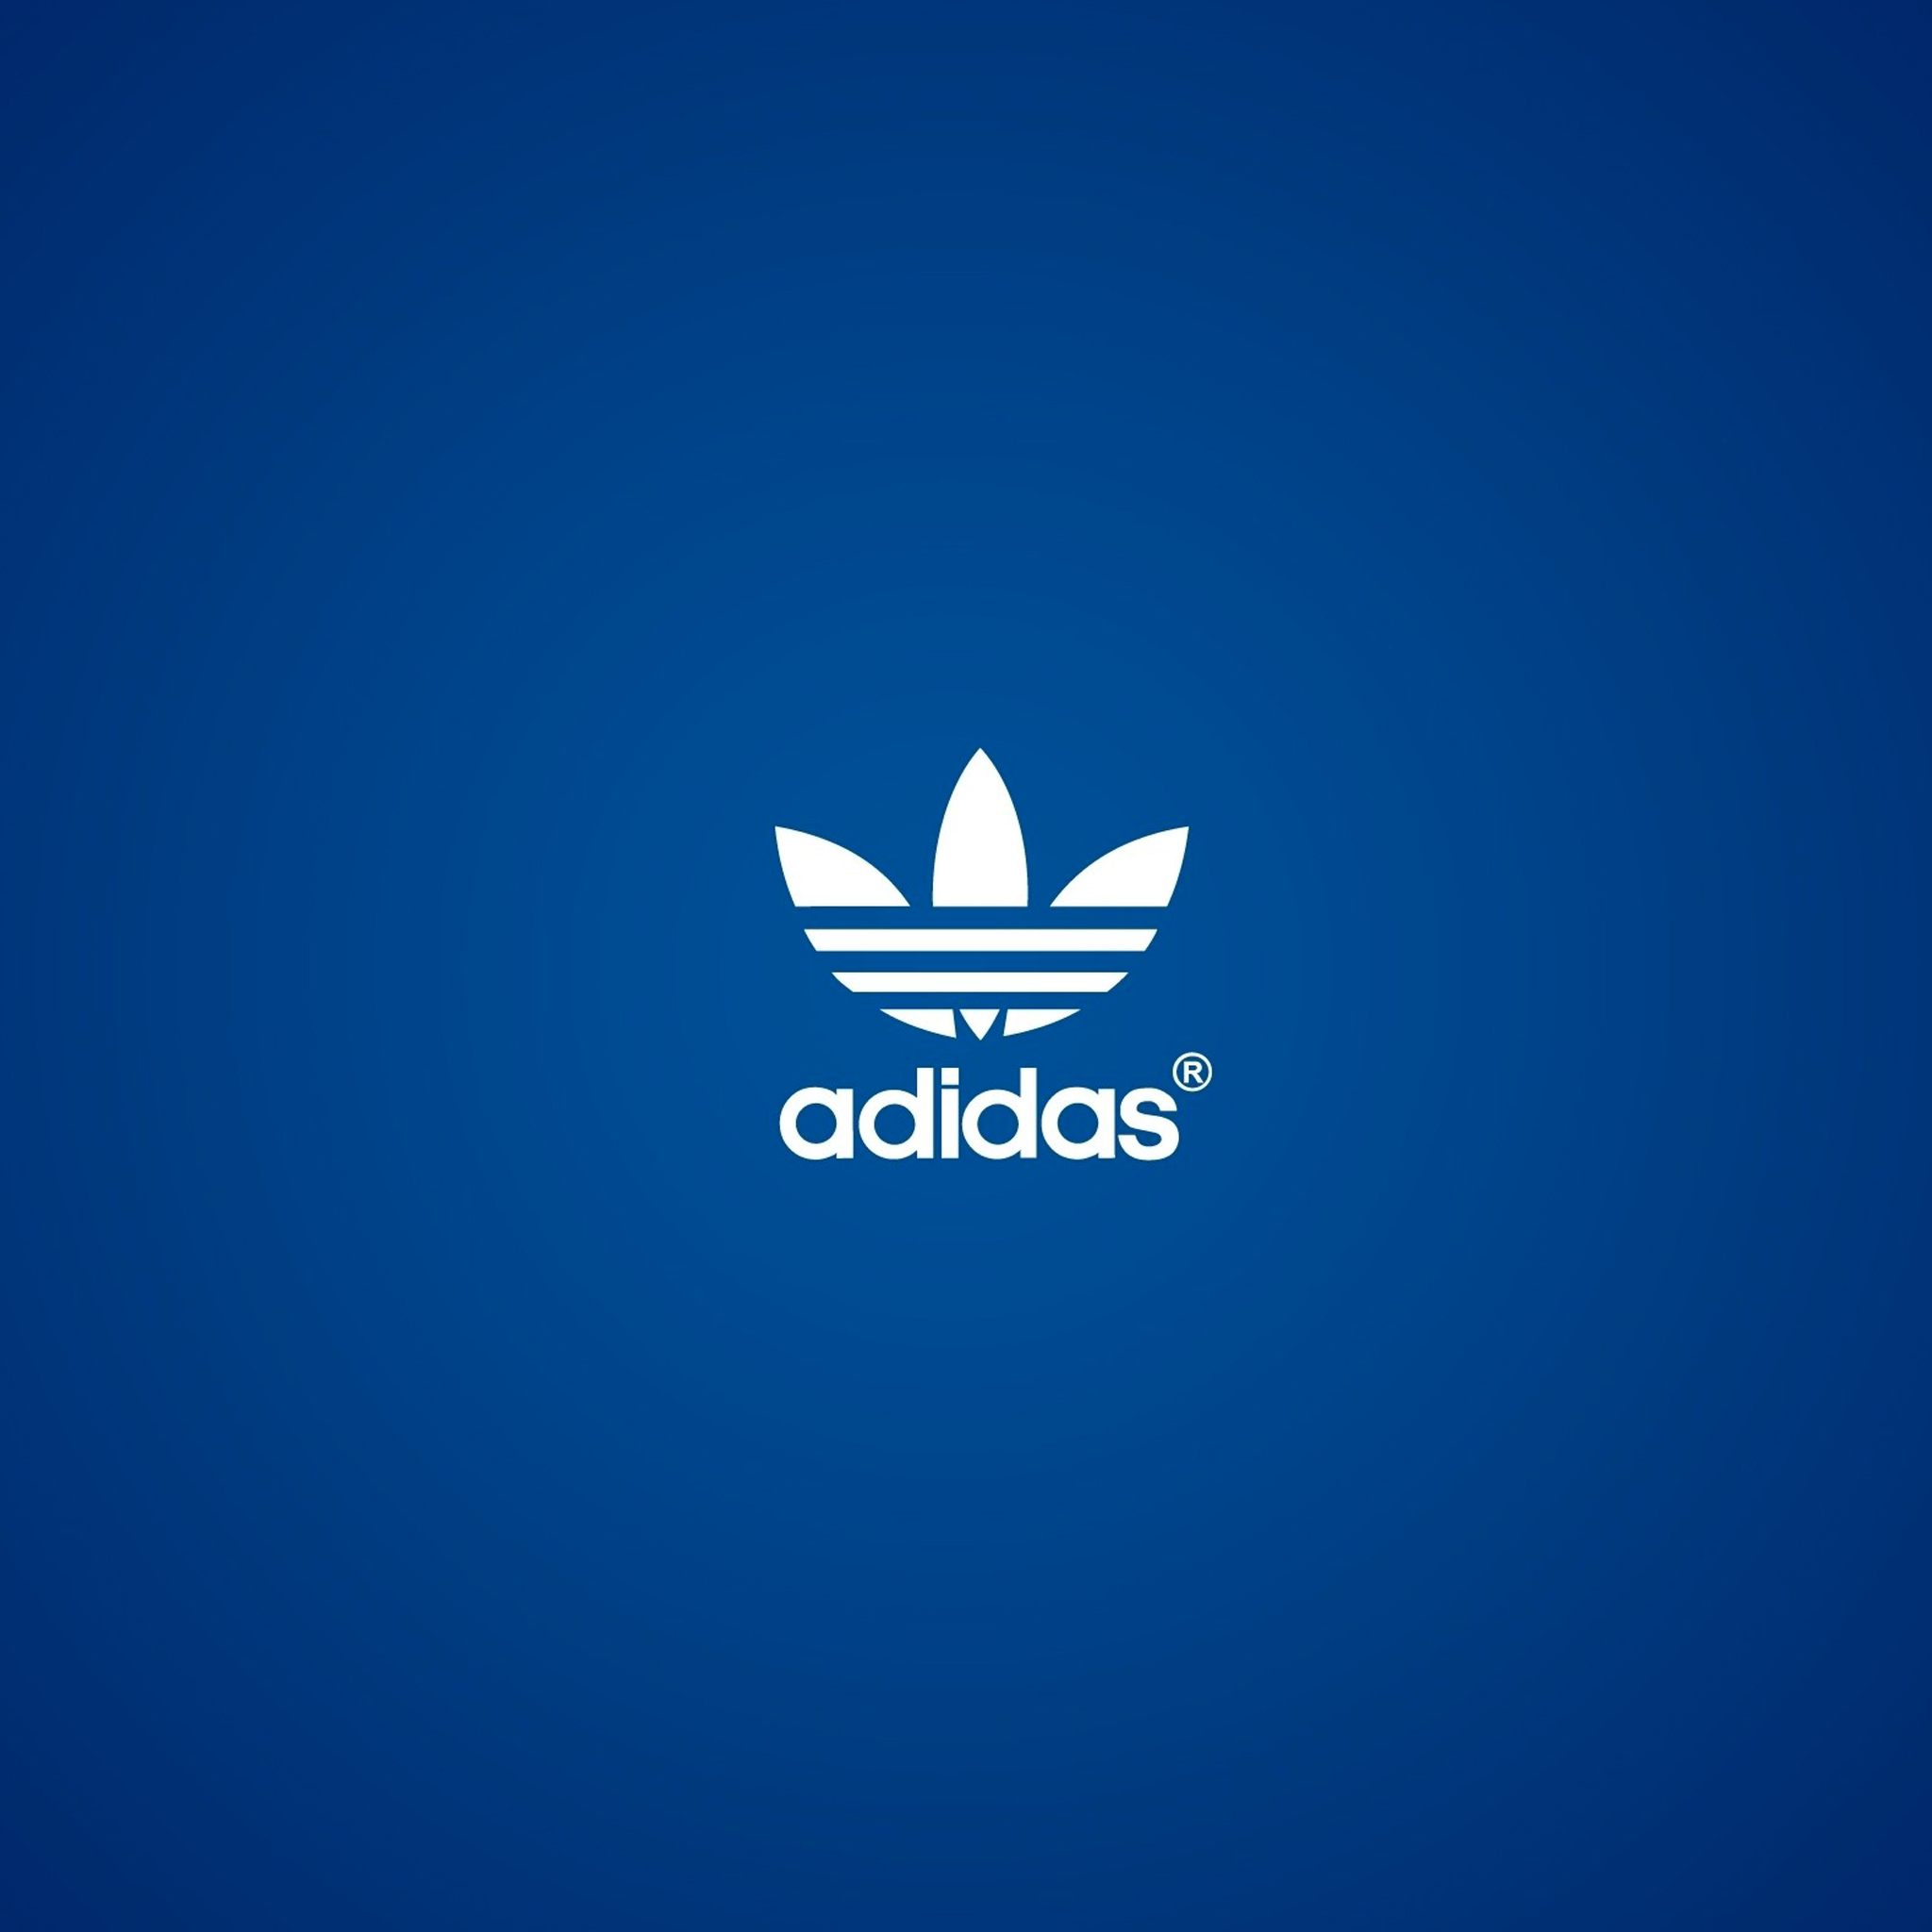 3wallpapers Best 3 Wallpapers A Day Only Retina 11 Iphone 5 New Ipad Raquo Adidas Blue 11 Ipad Retina Ipad タブレット壁紙ギャラリー